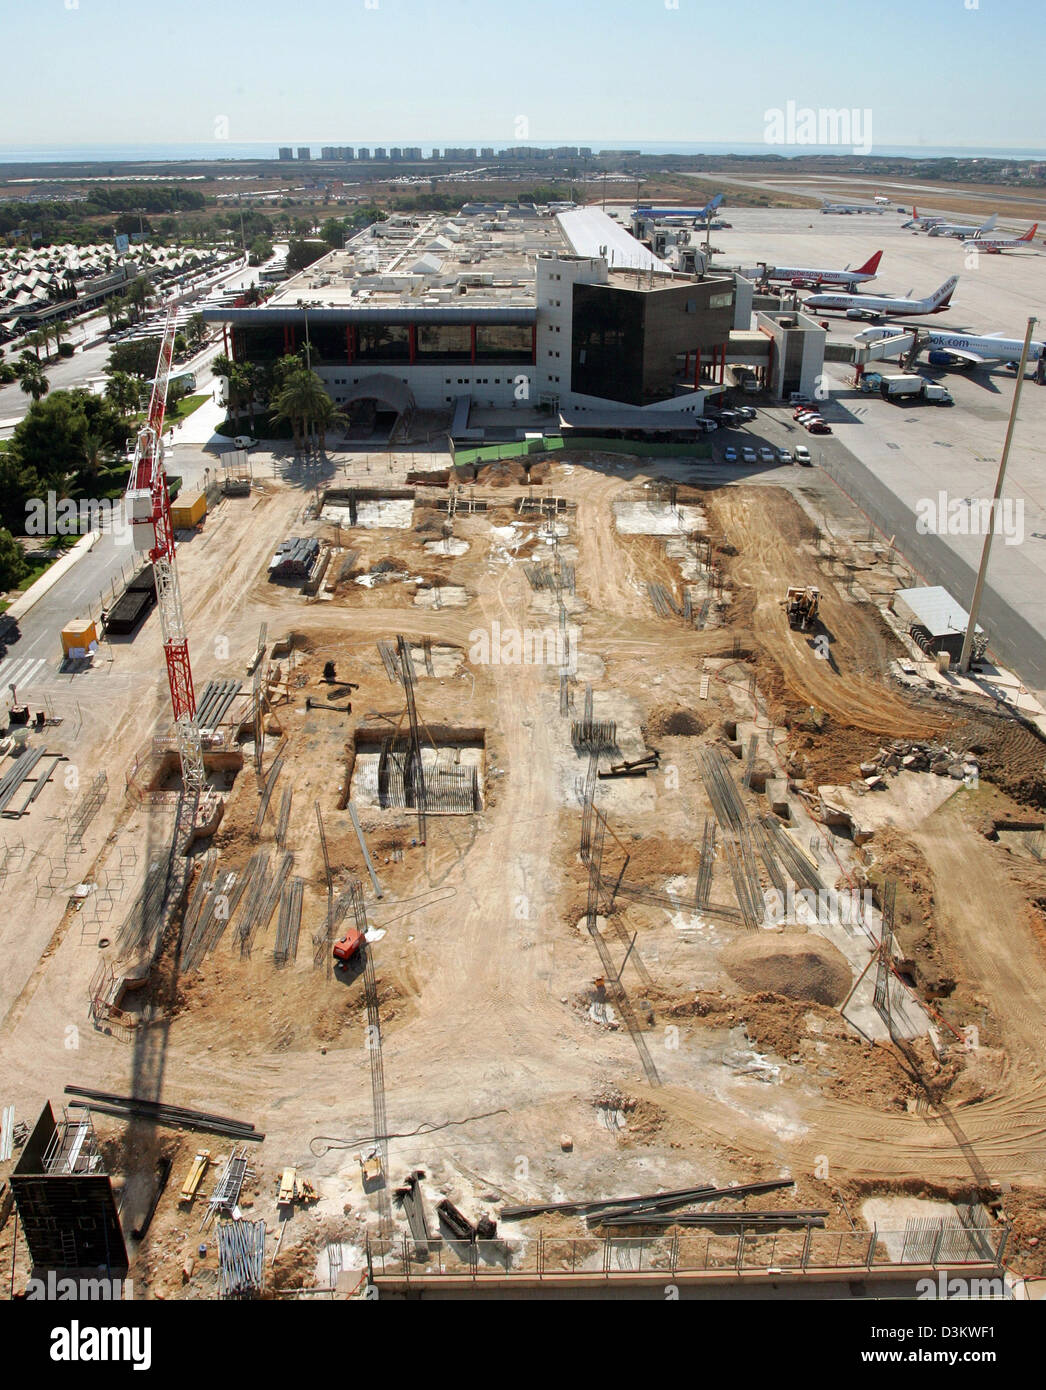 (dpa file) - The picture shows a construction site at the airport in Alicante which is currently being expanded, Spain, 12 July 2005. In 2004 8,57,281 passengers used the aiport, that was openend in 1967. Almost 7 million passengers have been international travellers mostly from Germany, the United Kingdom and The Netherlands. Photo: Alexander Ruesche Stock Photo